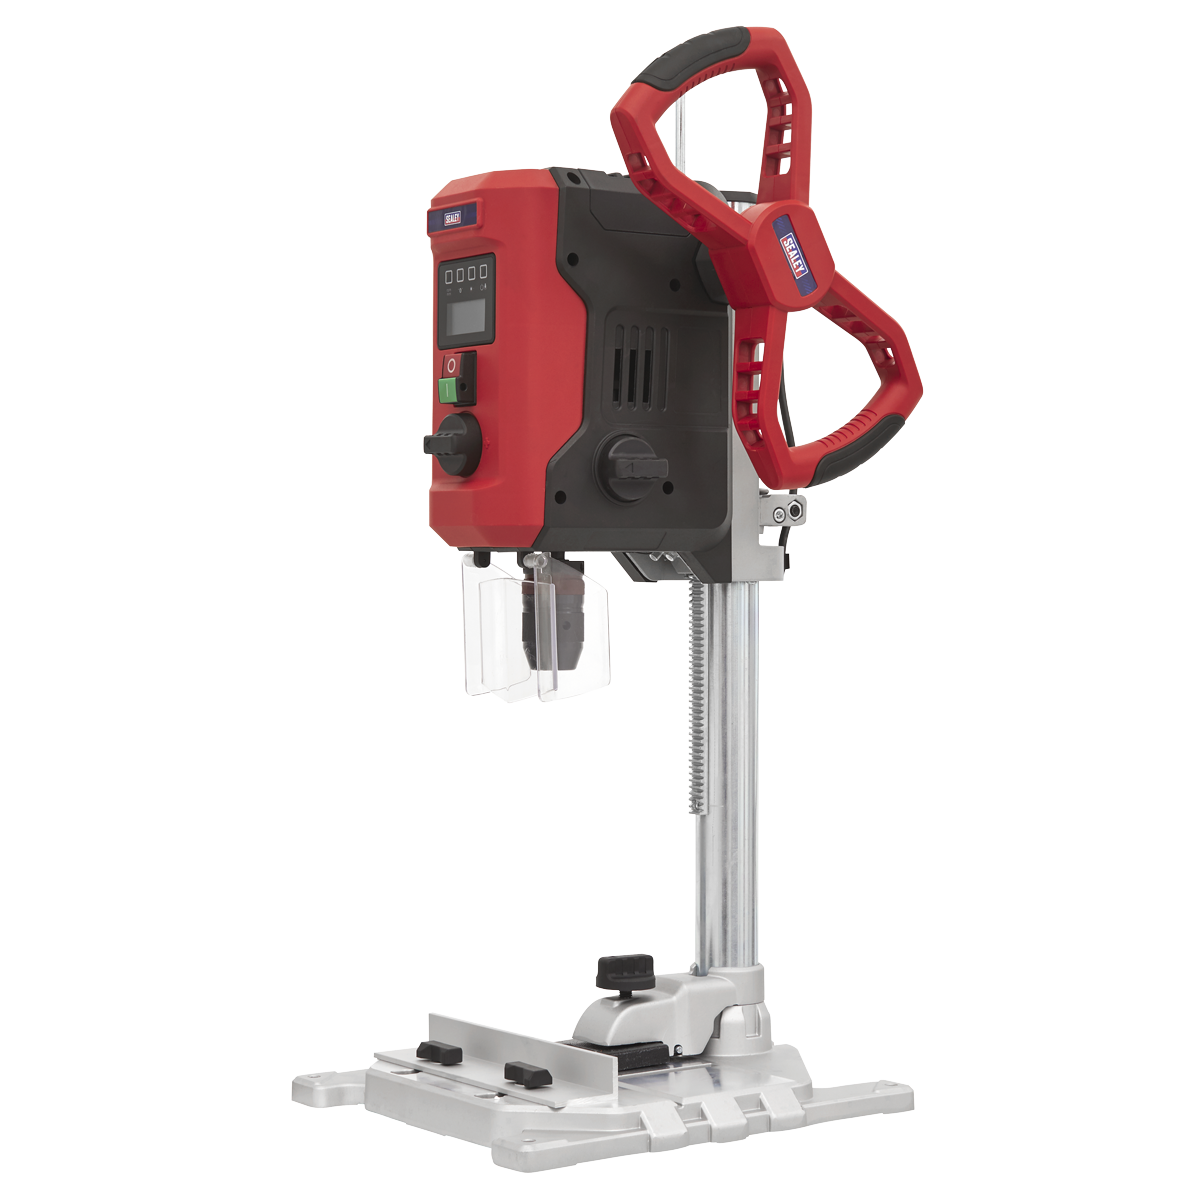 Sealey Bench Pillar Drill with Digital Display & Laser Guide 720W